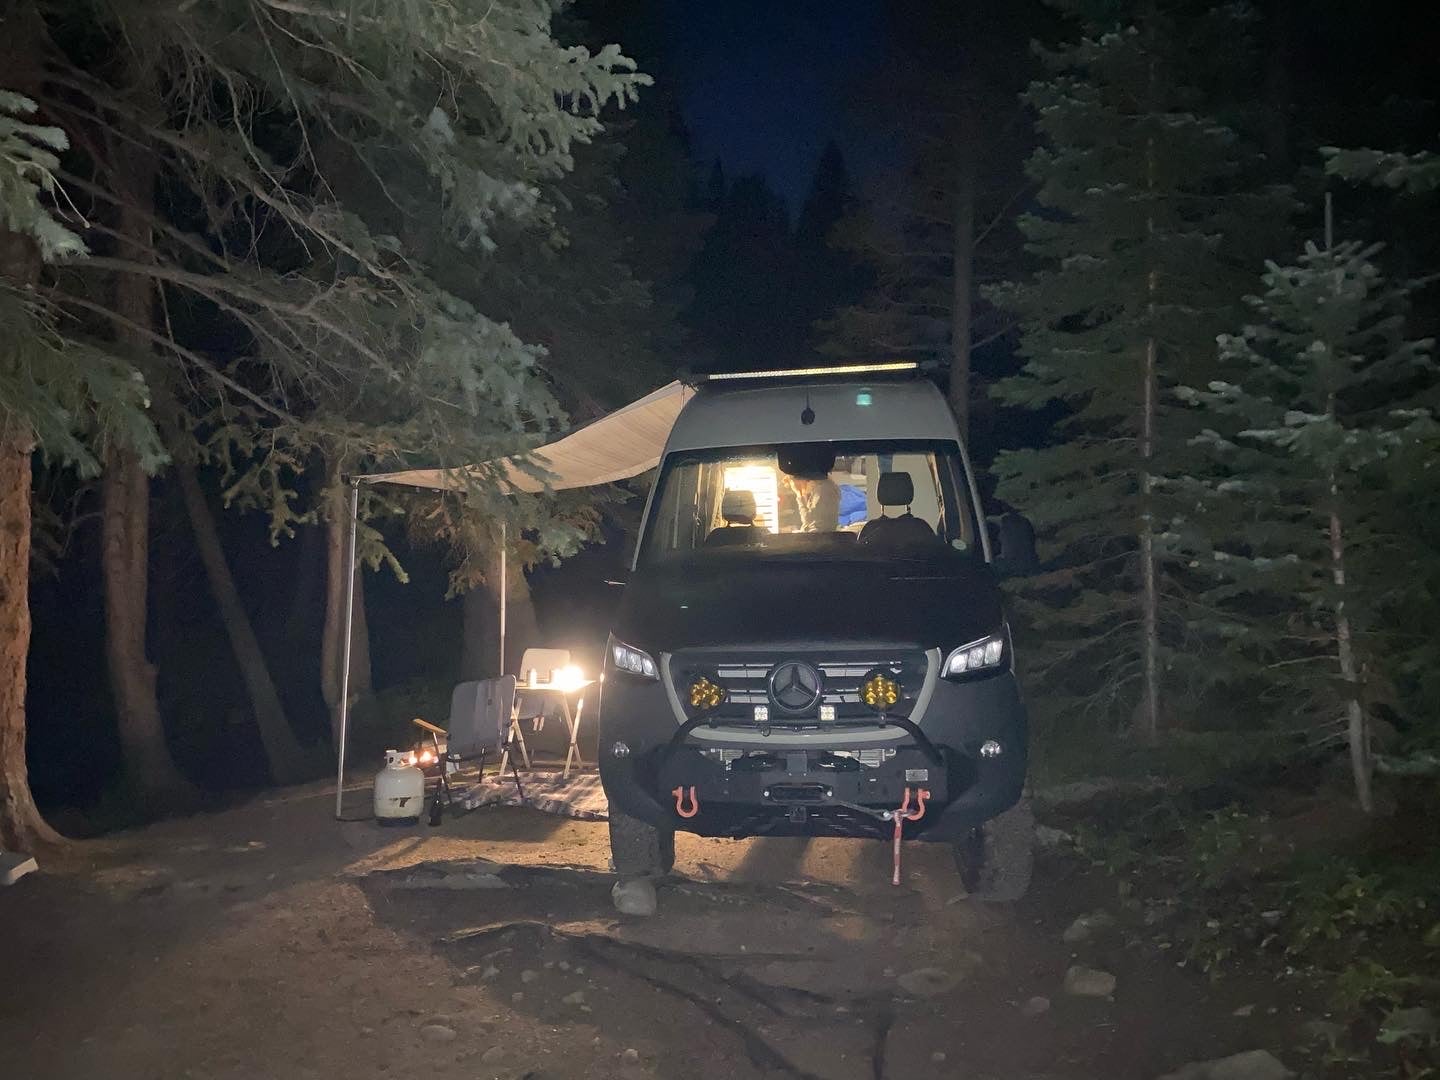 Camper submitted image from Allenspark Dispersed Camping - 3